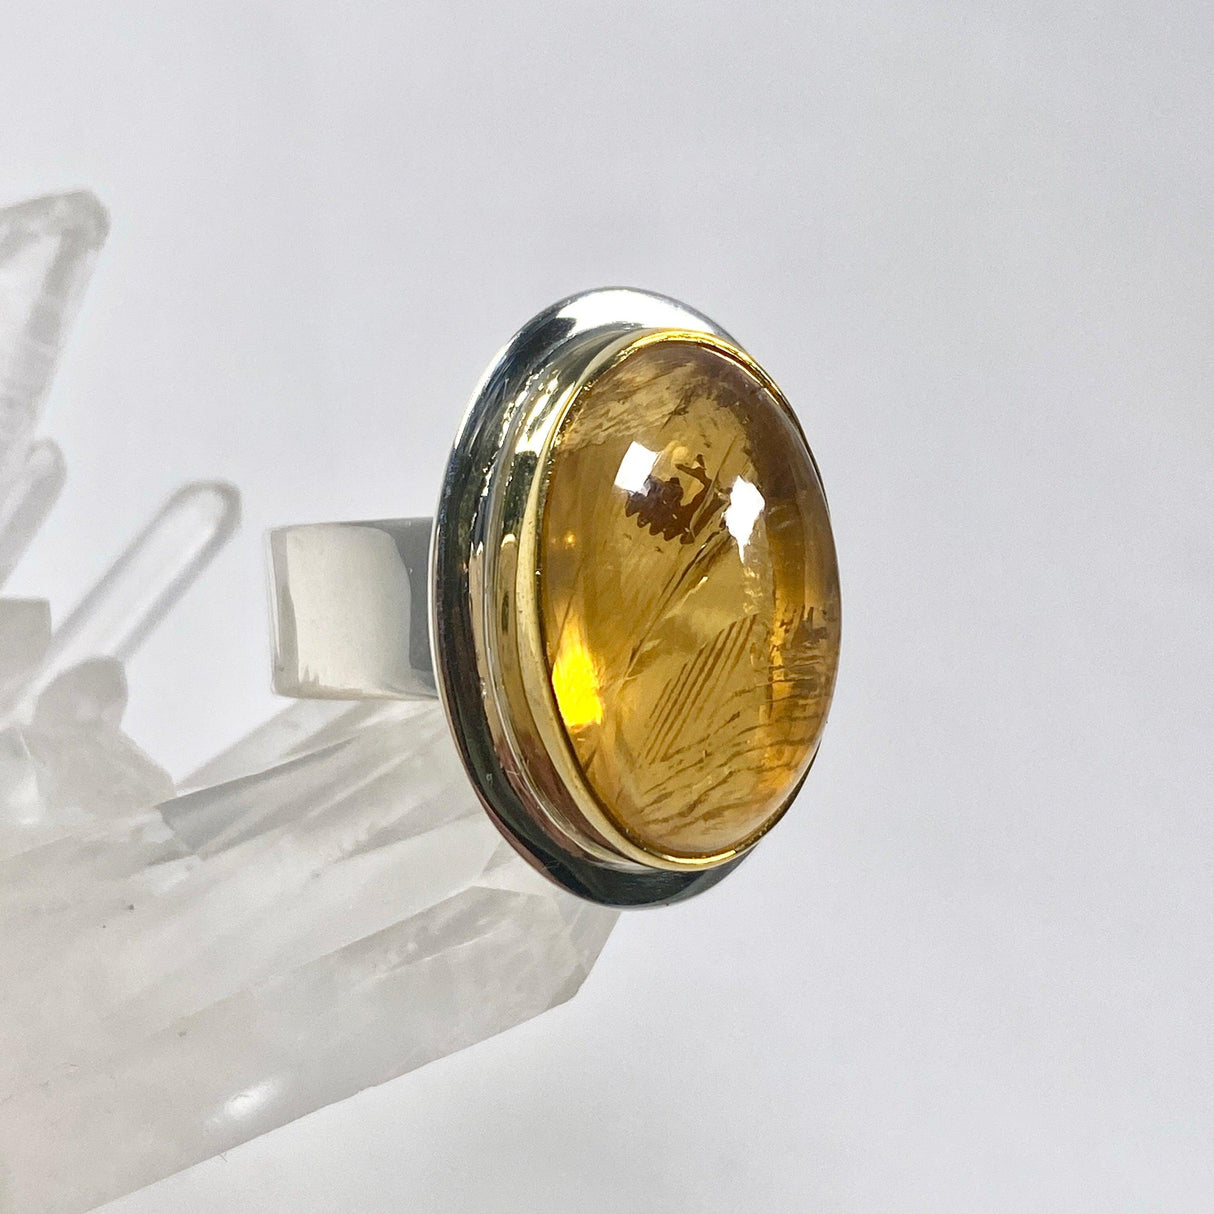 Citrine oval ring with gold detailing s.11 KRGJ2843 - Nature's Magick